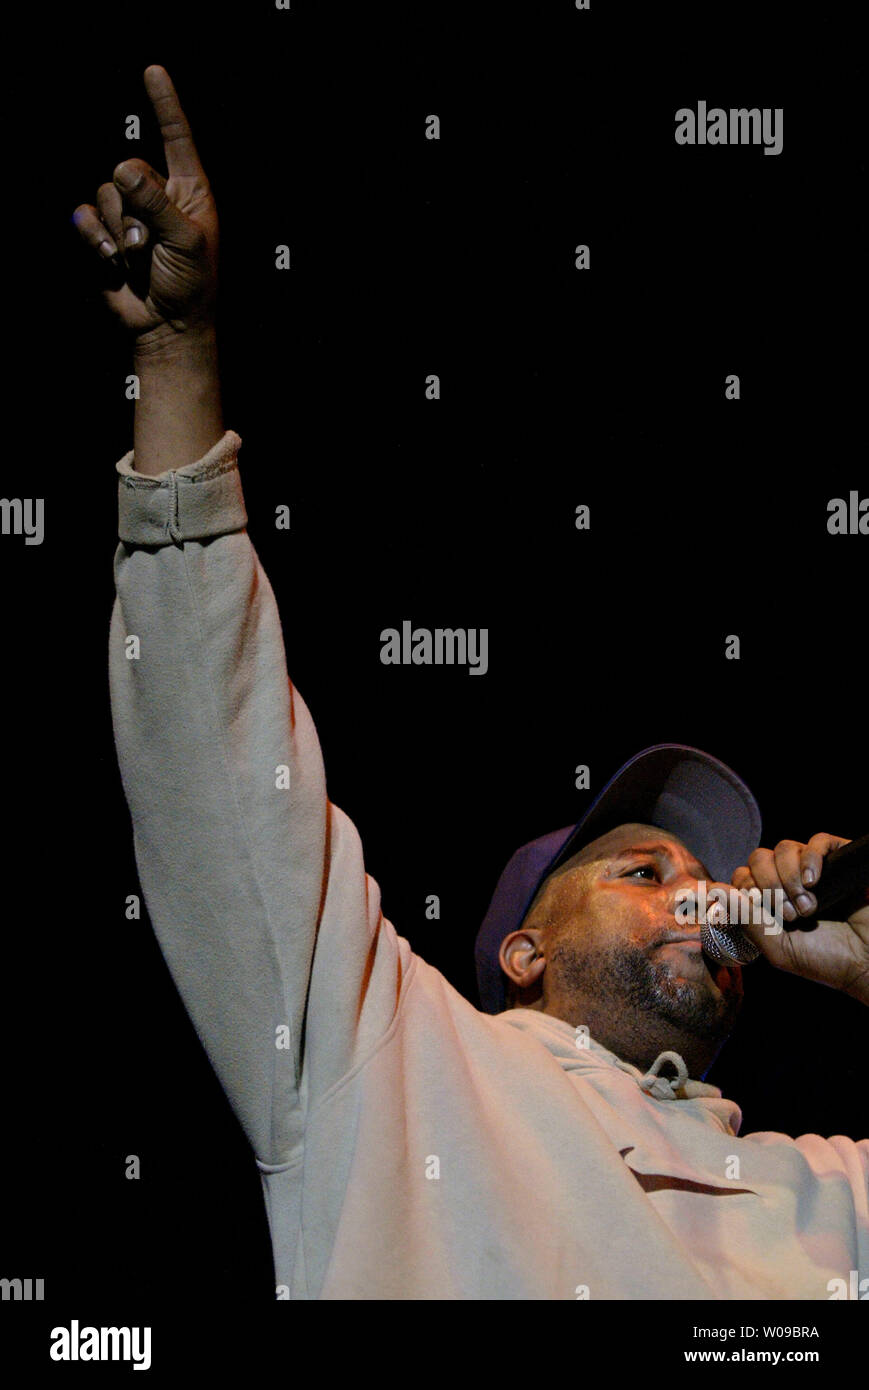 Rapper Tone Loc performed on the final night of the annual Beale Street Music Festival on Sunday, May 2, 2004 at Tom Lee Park in Memphis, Tenn. (UPI Photo/Billy Suratt) Stock Photo